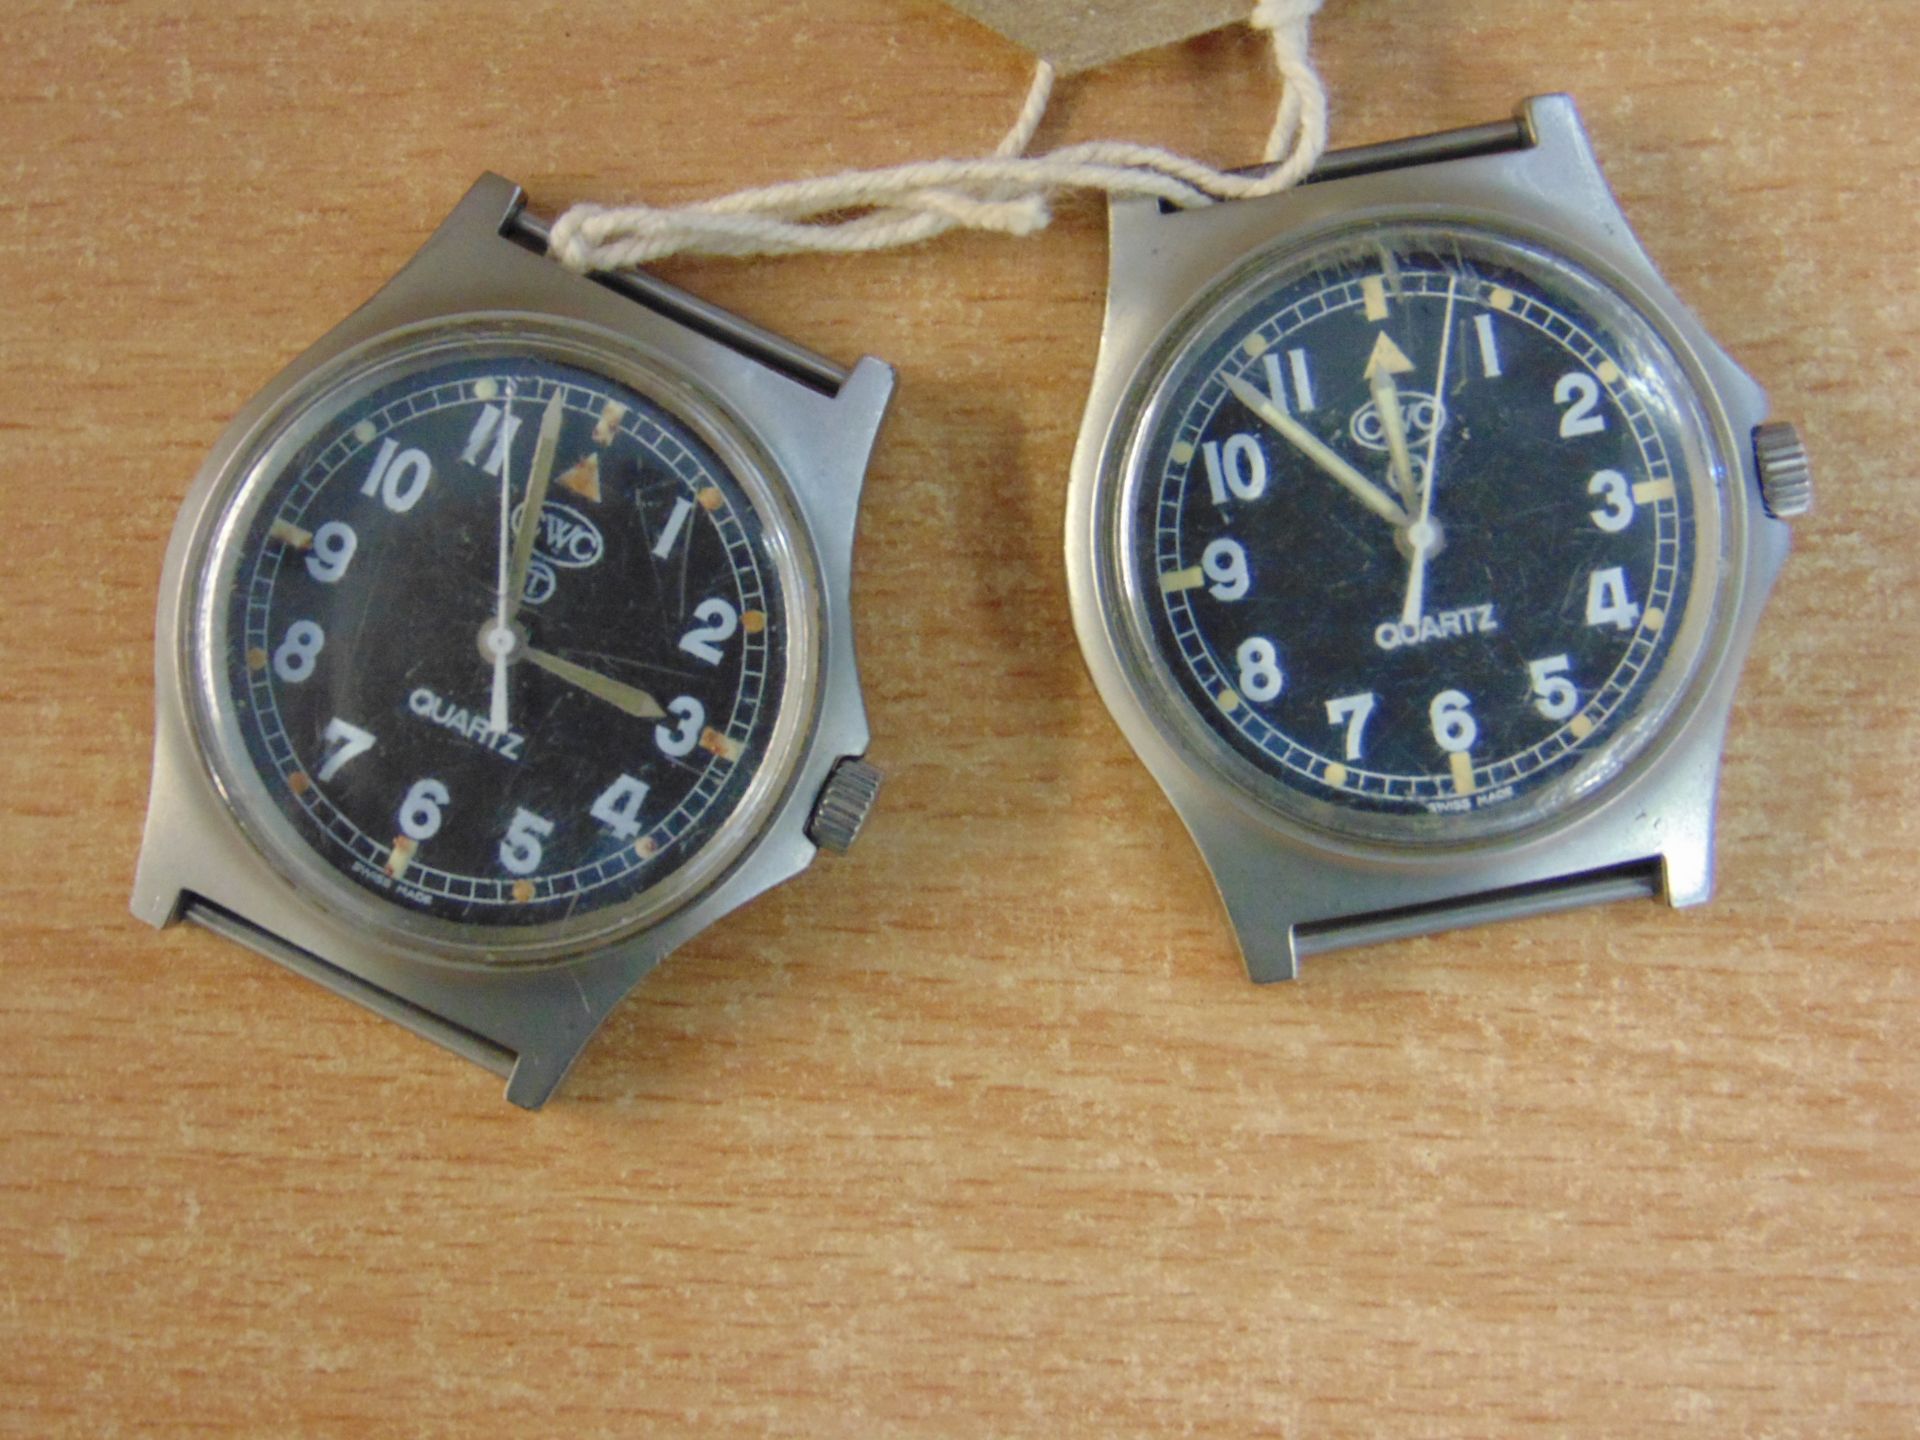 2X CWC SERVICE WATCHES 1X 0552 DATE 1990 / 1X W10 DATE 1998 NATO MARKED